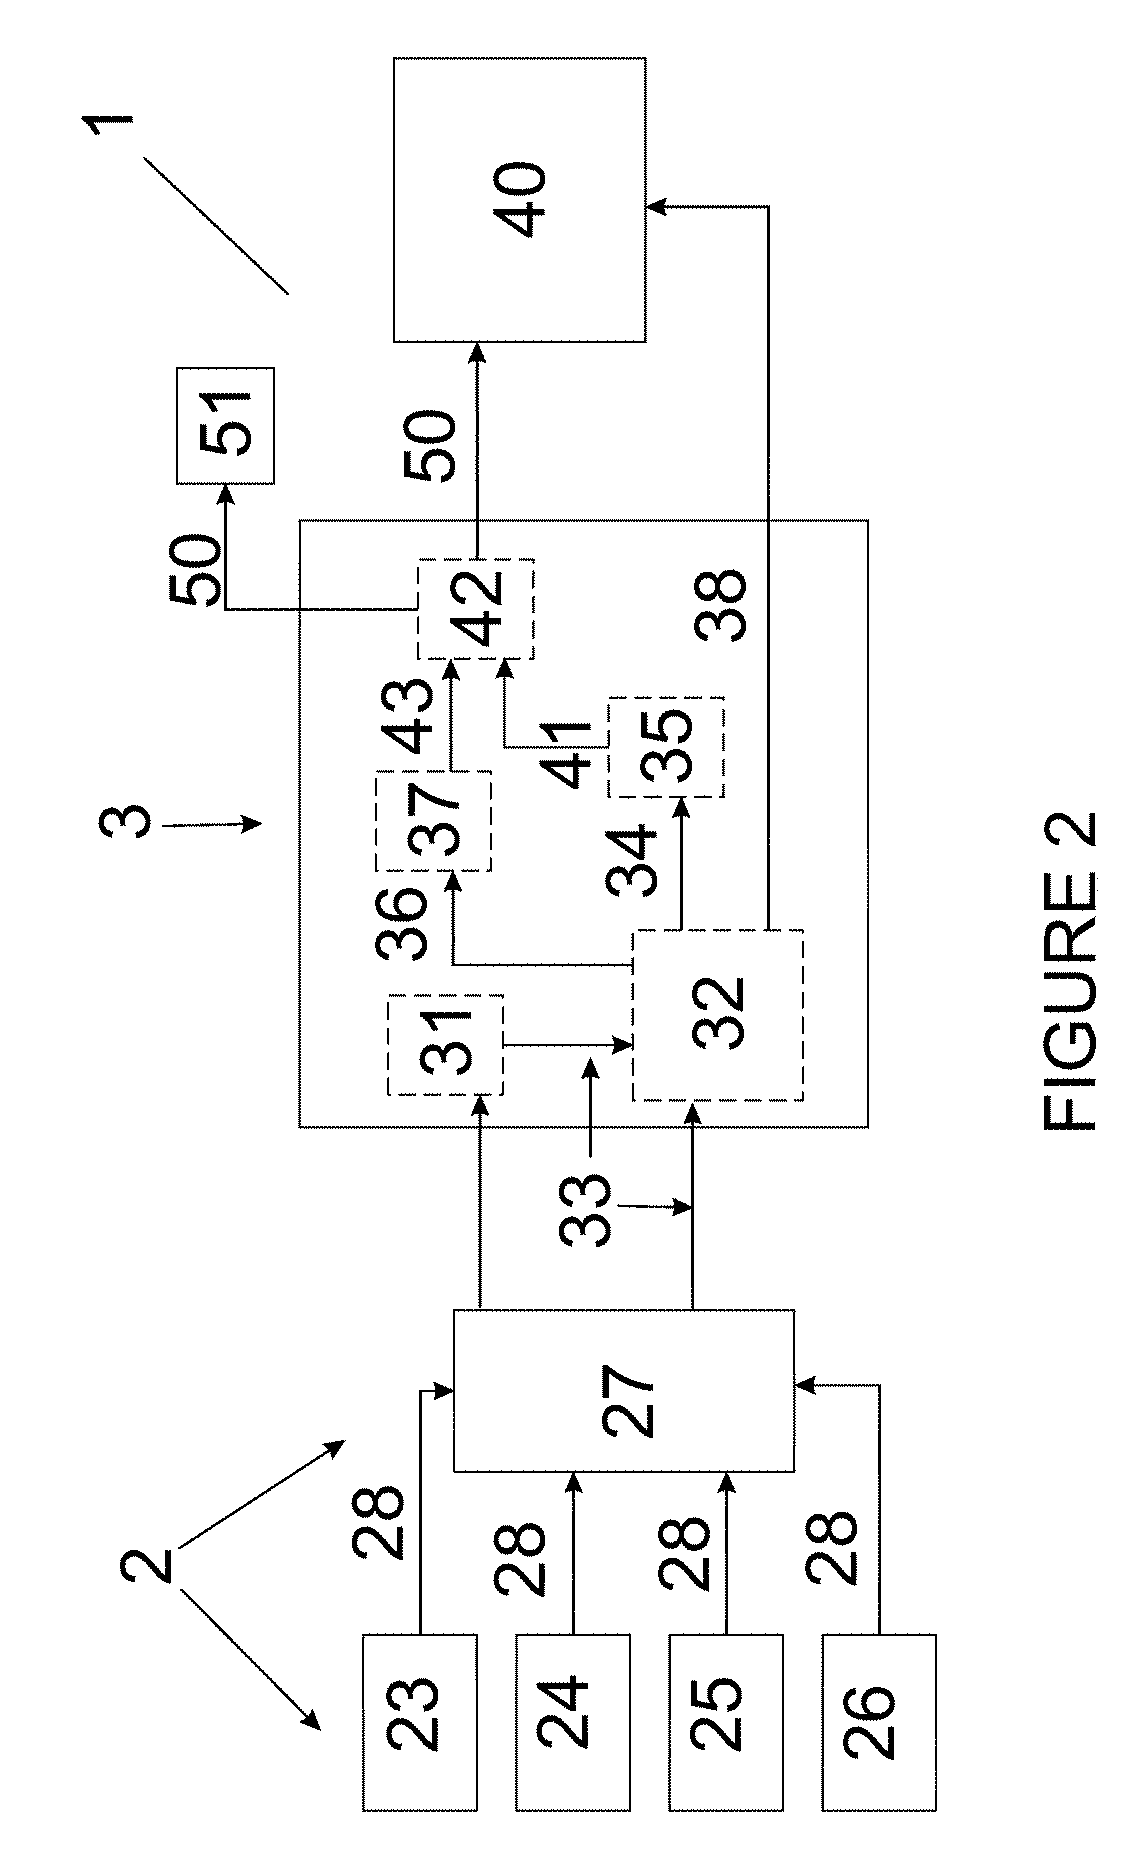 Evidence based interactive monitoring device and method